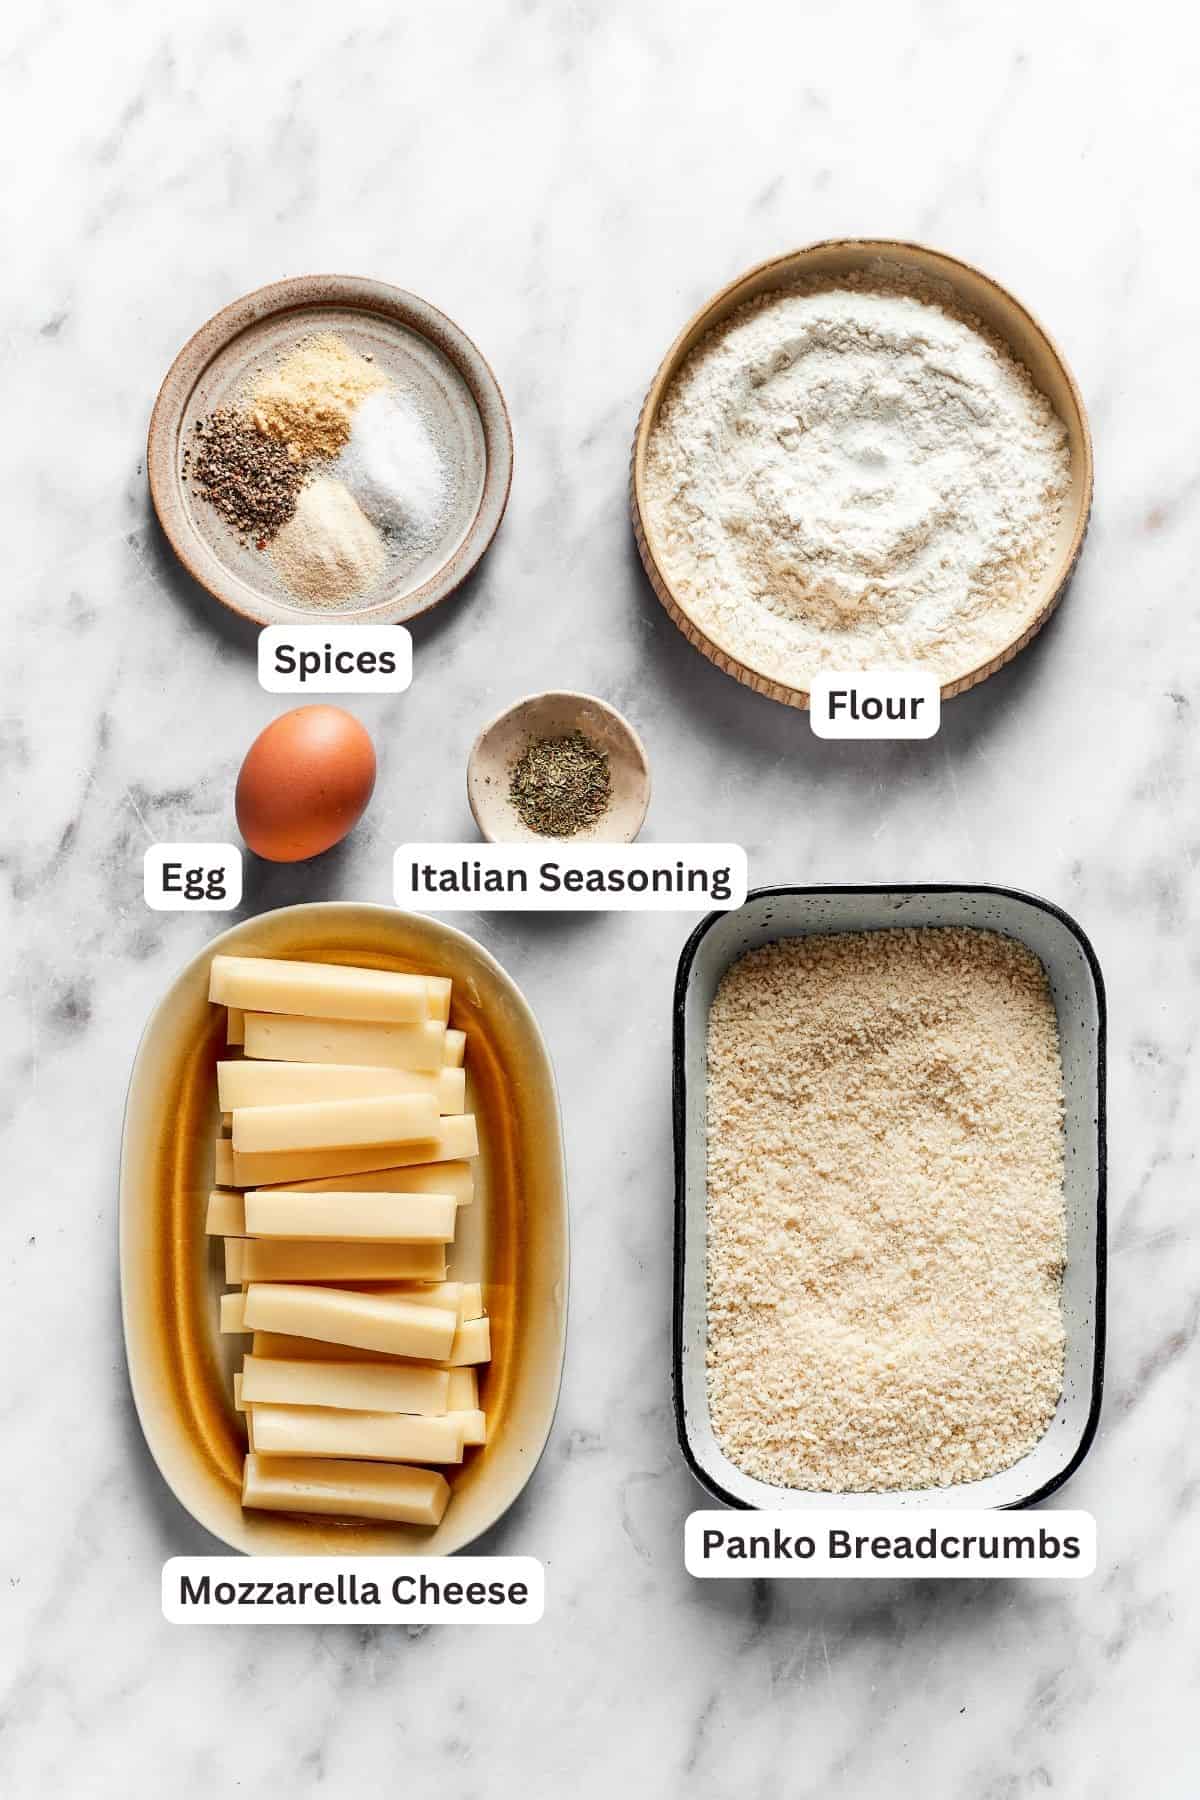 The ingredients for mozzarella sticks are shown portioned out and labeled: mozzarella cheese, panko breadcrumbs, flour, egg, Italian seasoning, salt and pepper.